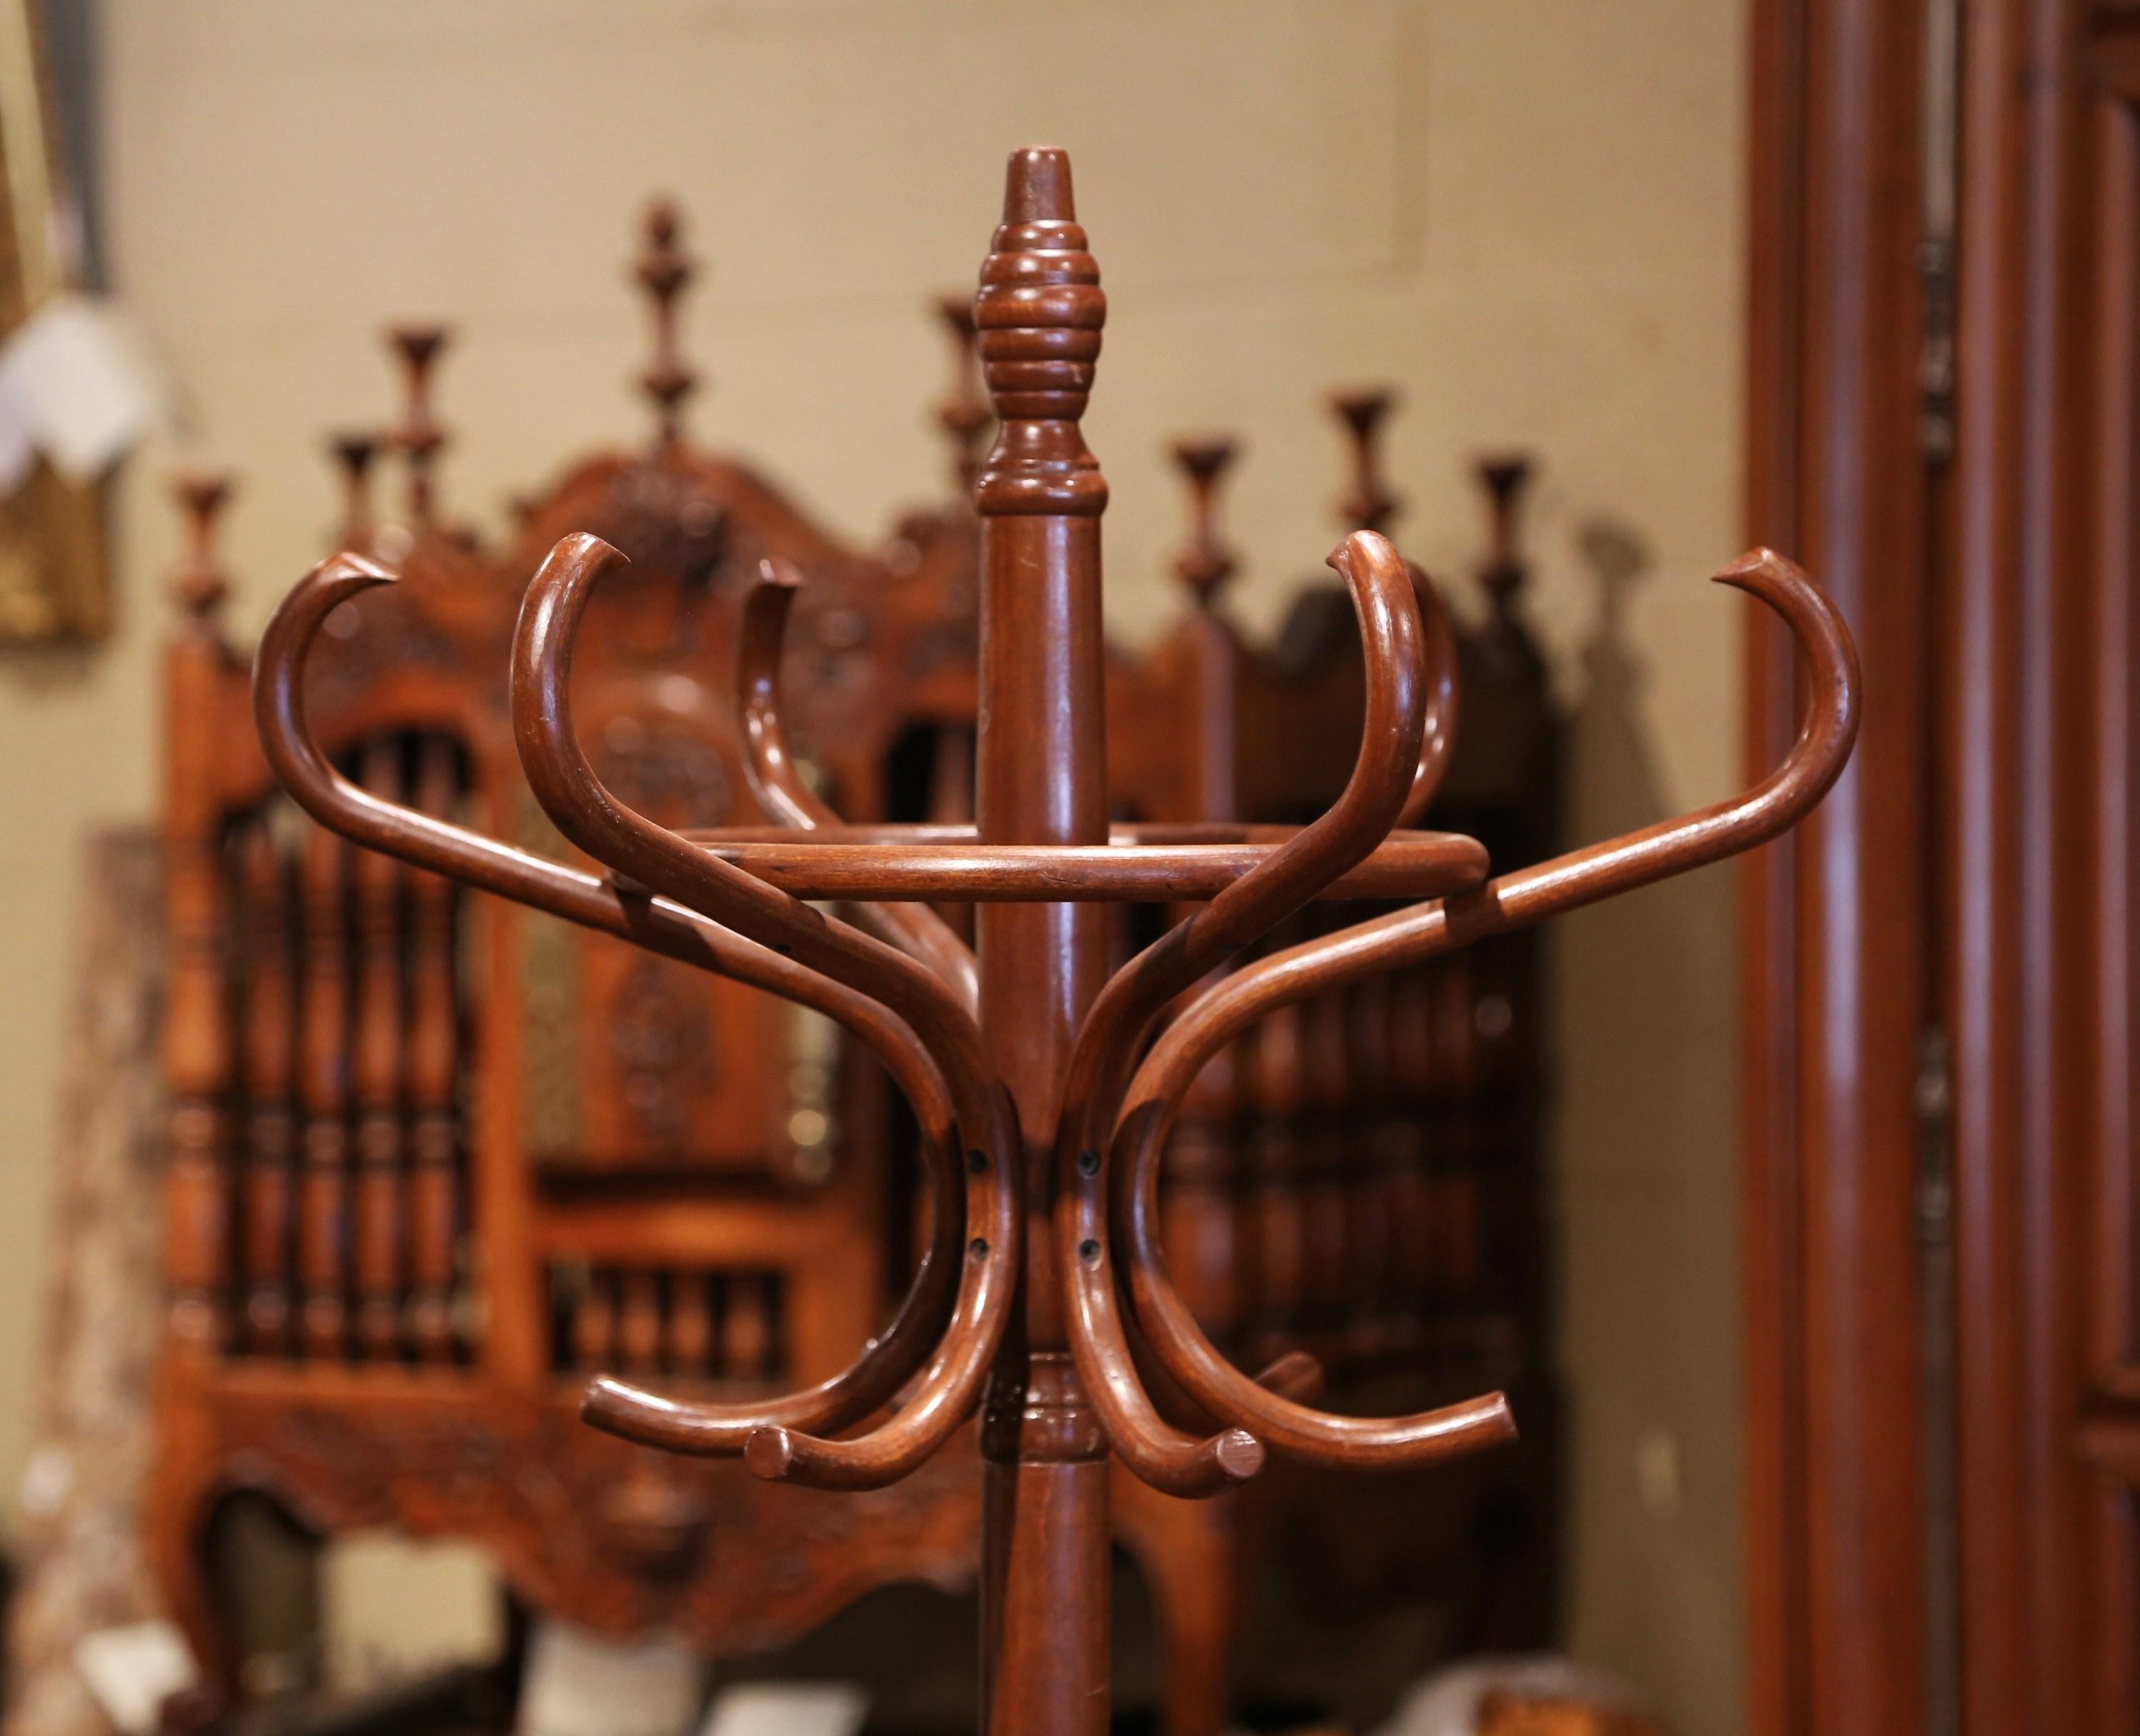 Art Deco Mid-20th Century French Bentwood Swivel Coat Stand or Hat Rack Thonet Style